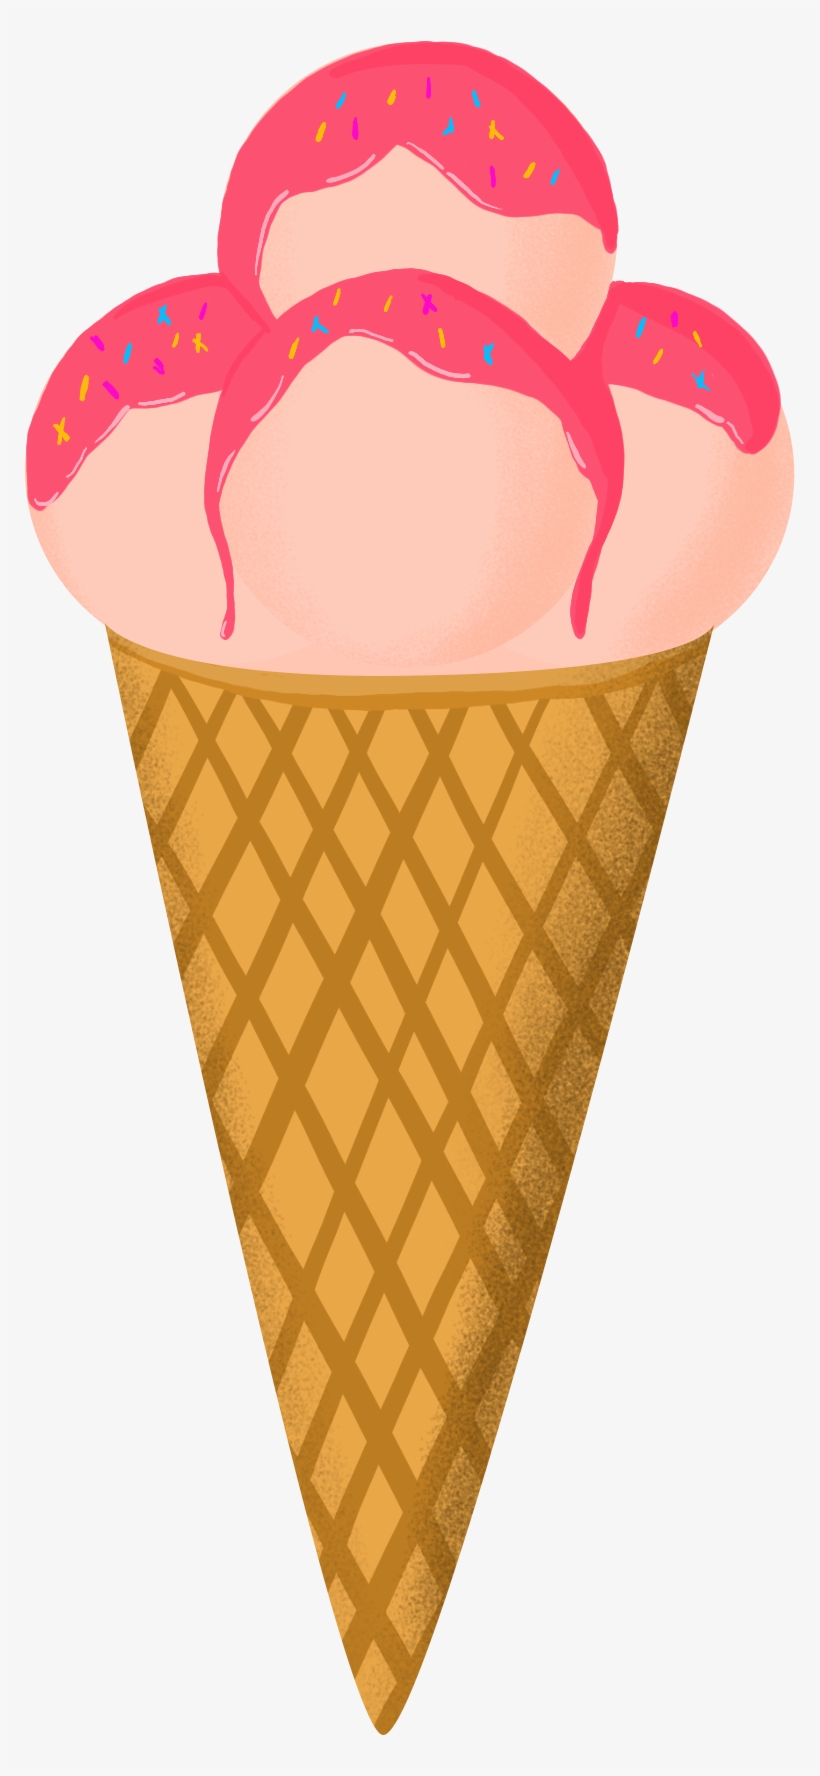 Ice Cream Food Decorative Elements Png And Psd - Ice Cream Cone, transparent png #8089246